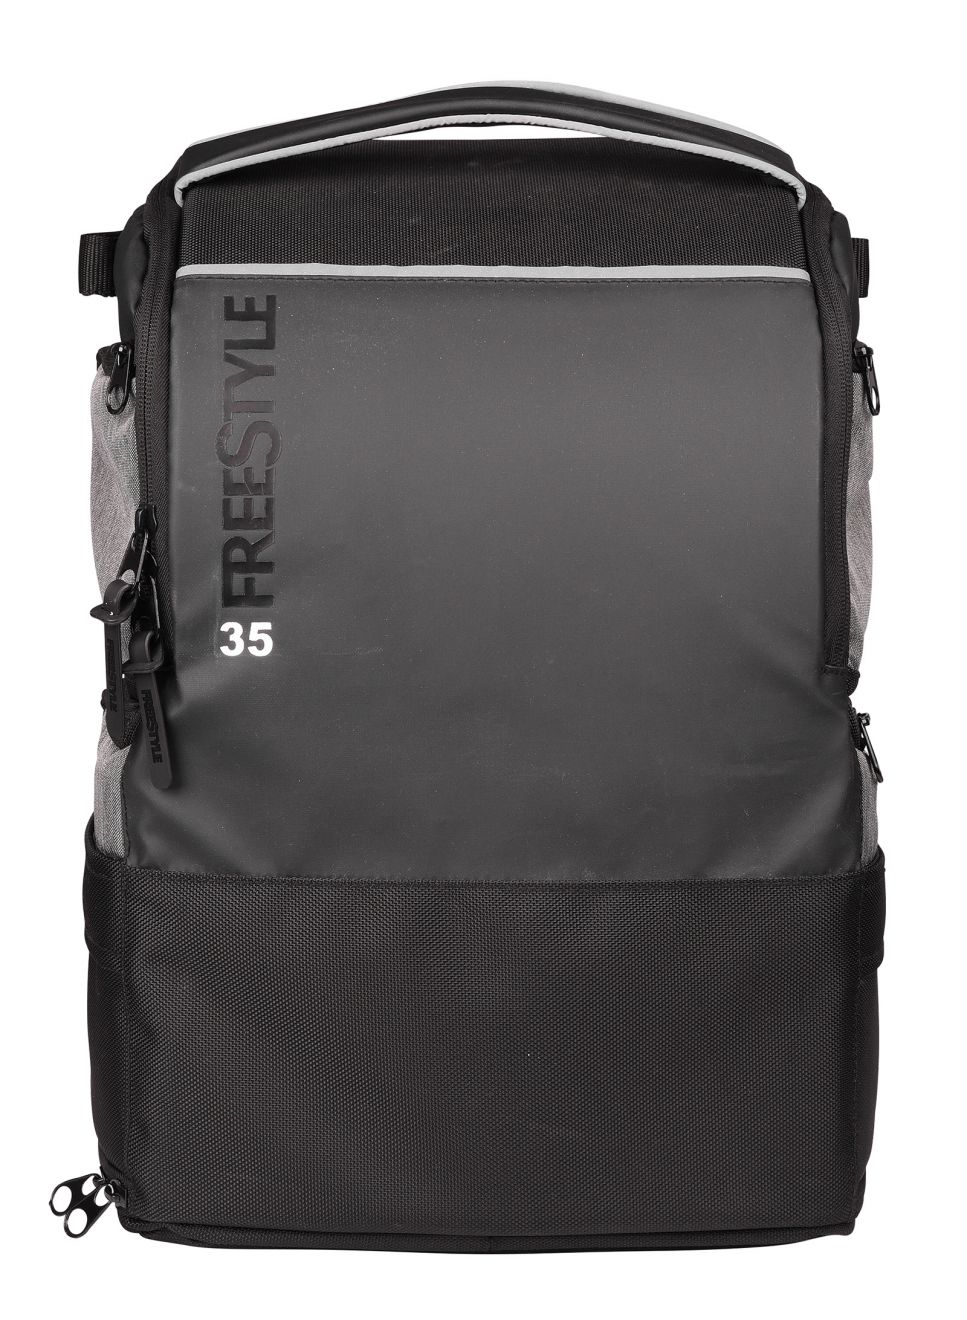 Spro Freestyle Backpack 35 45 x 35 x 17cm (incl. 6 tackle boxes)